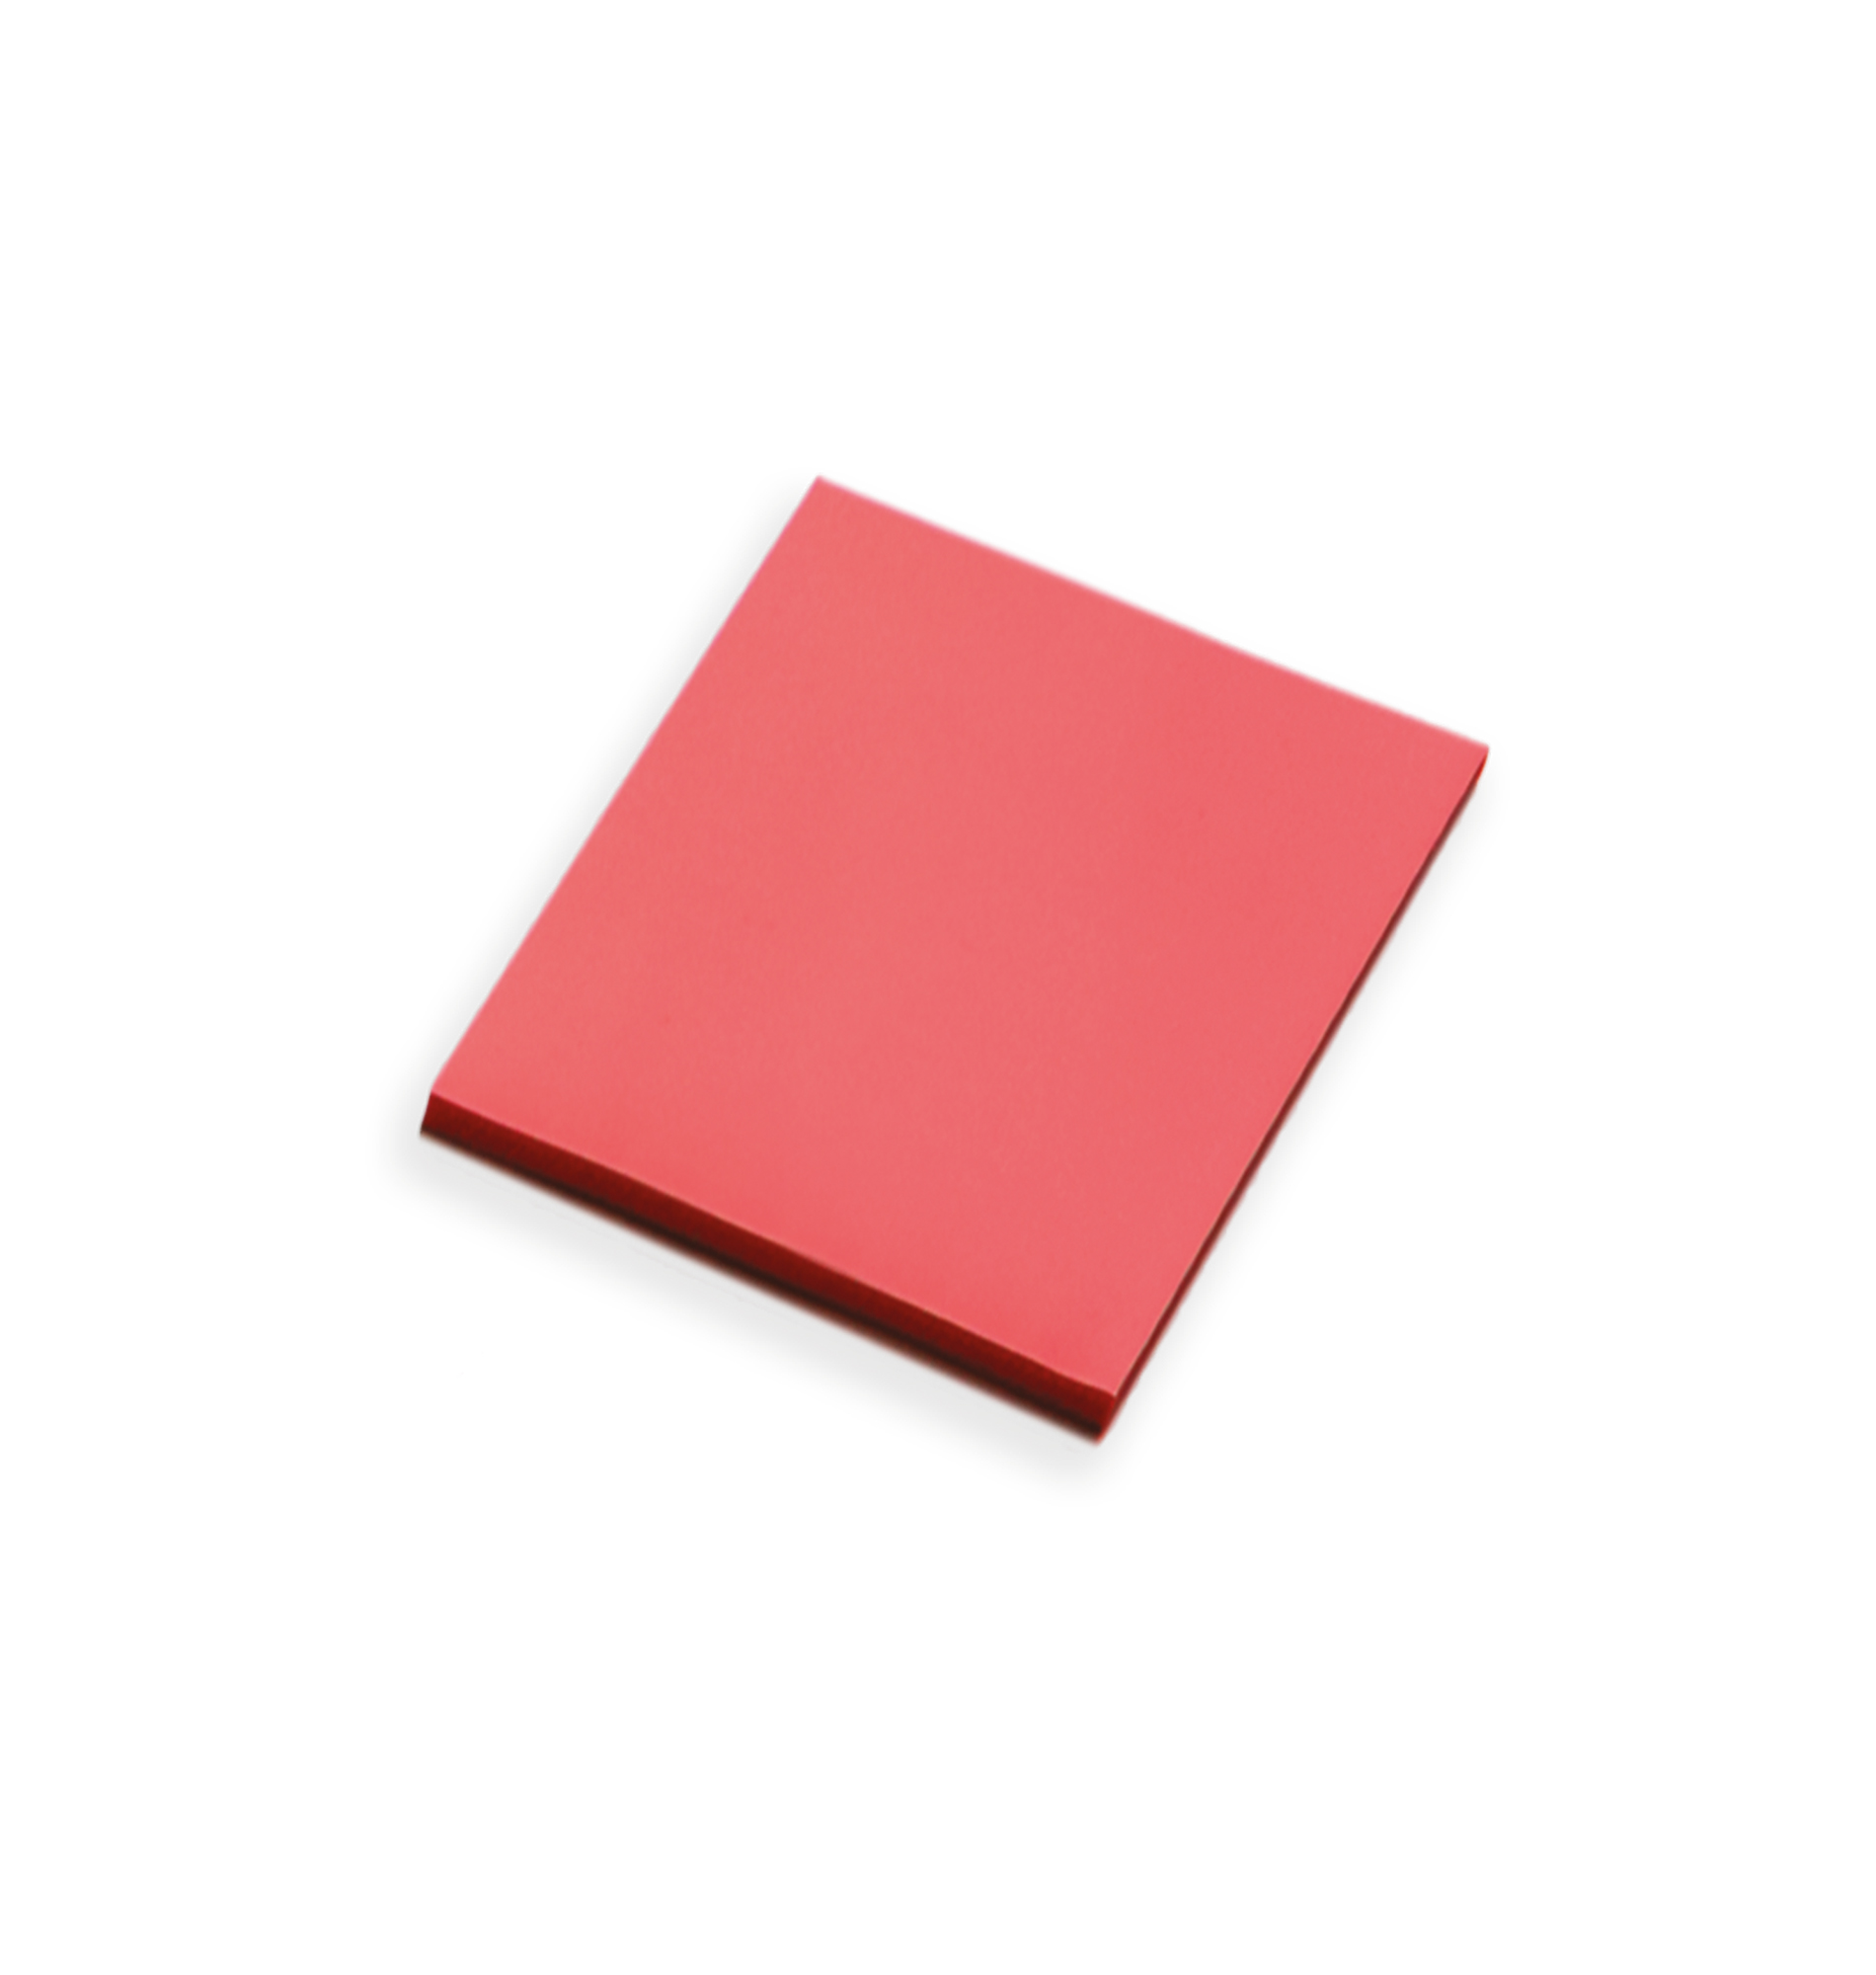 TaktiNotes 9x9cm packaging unit 100 red